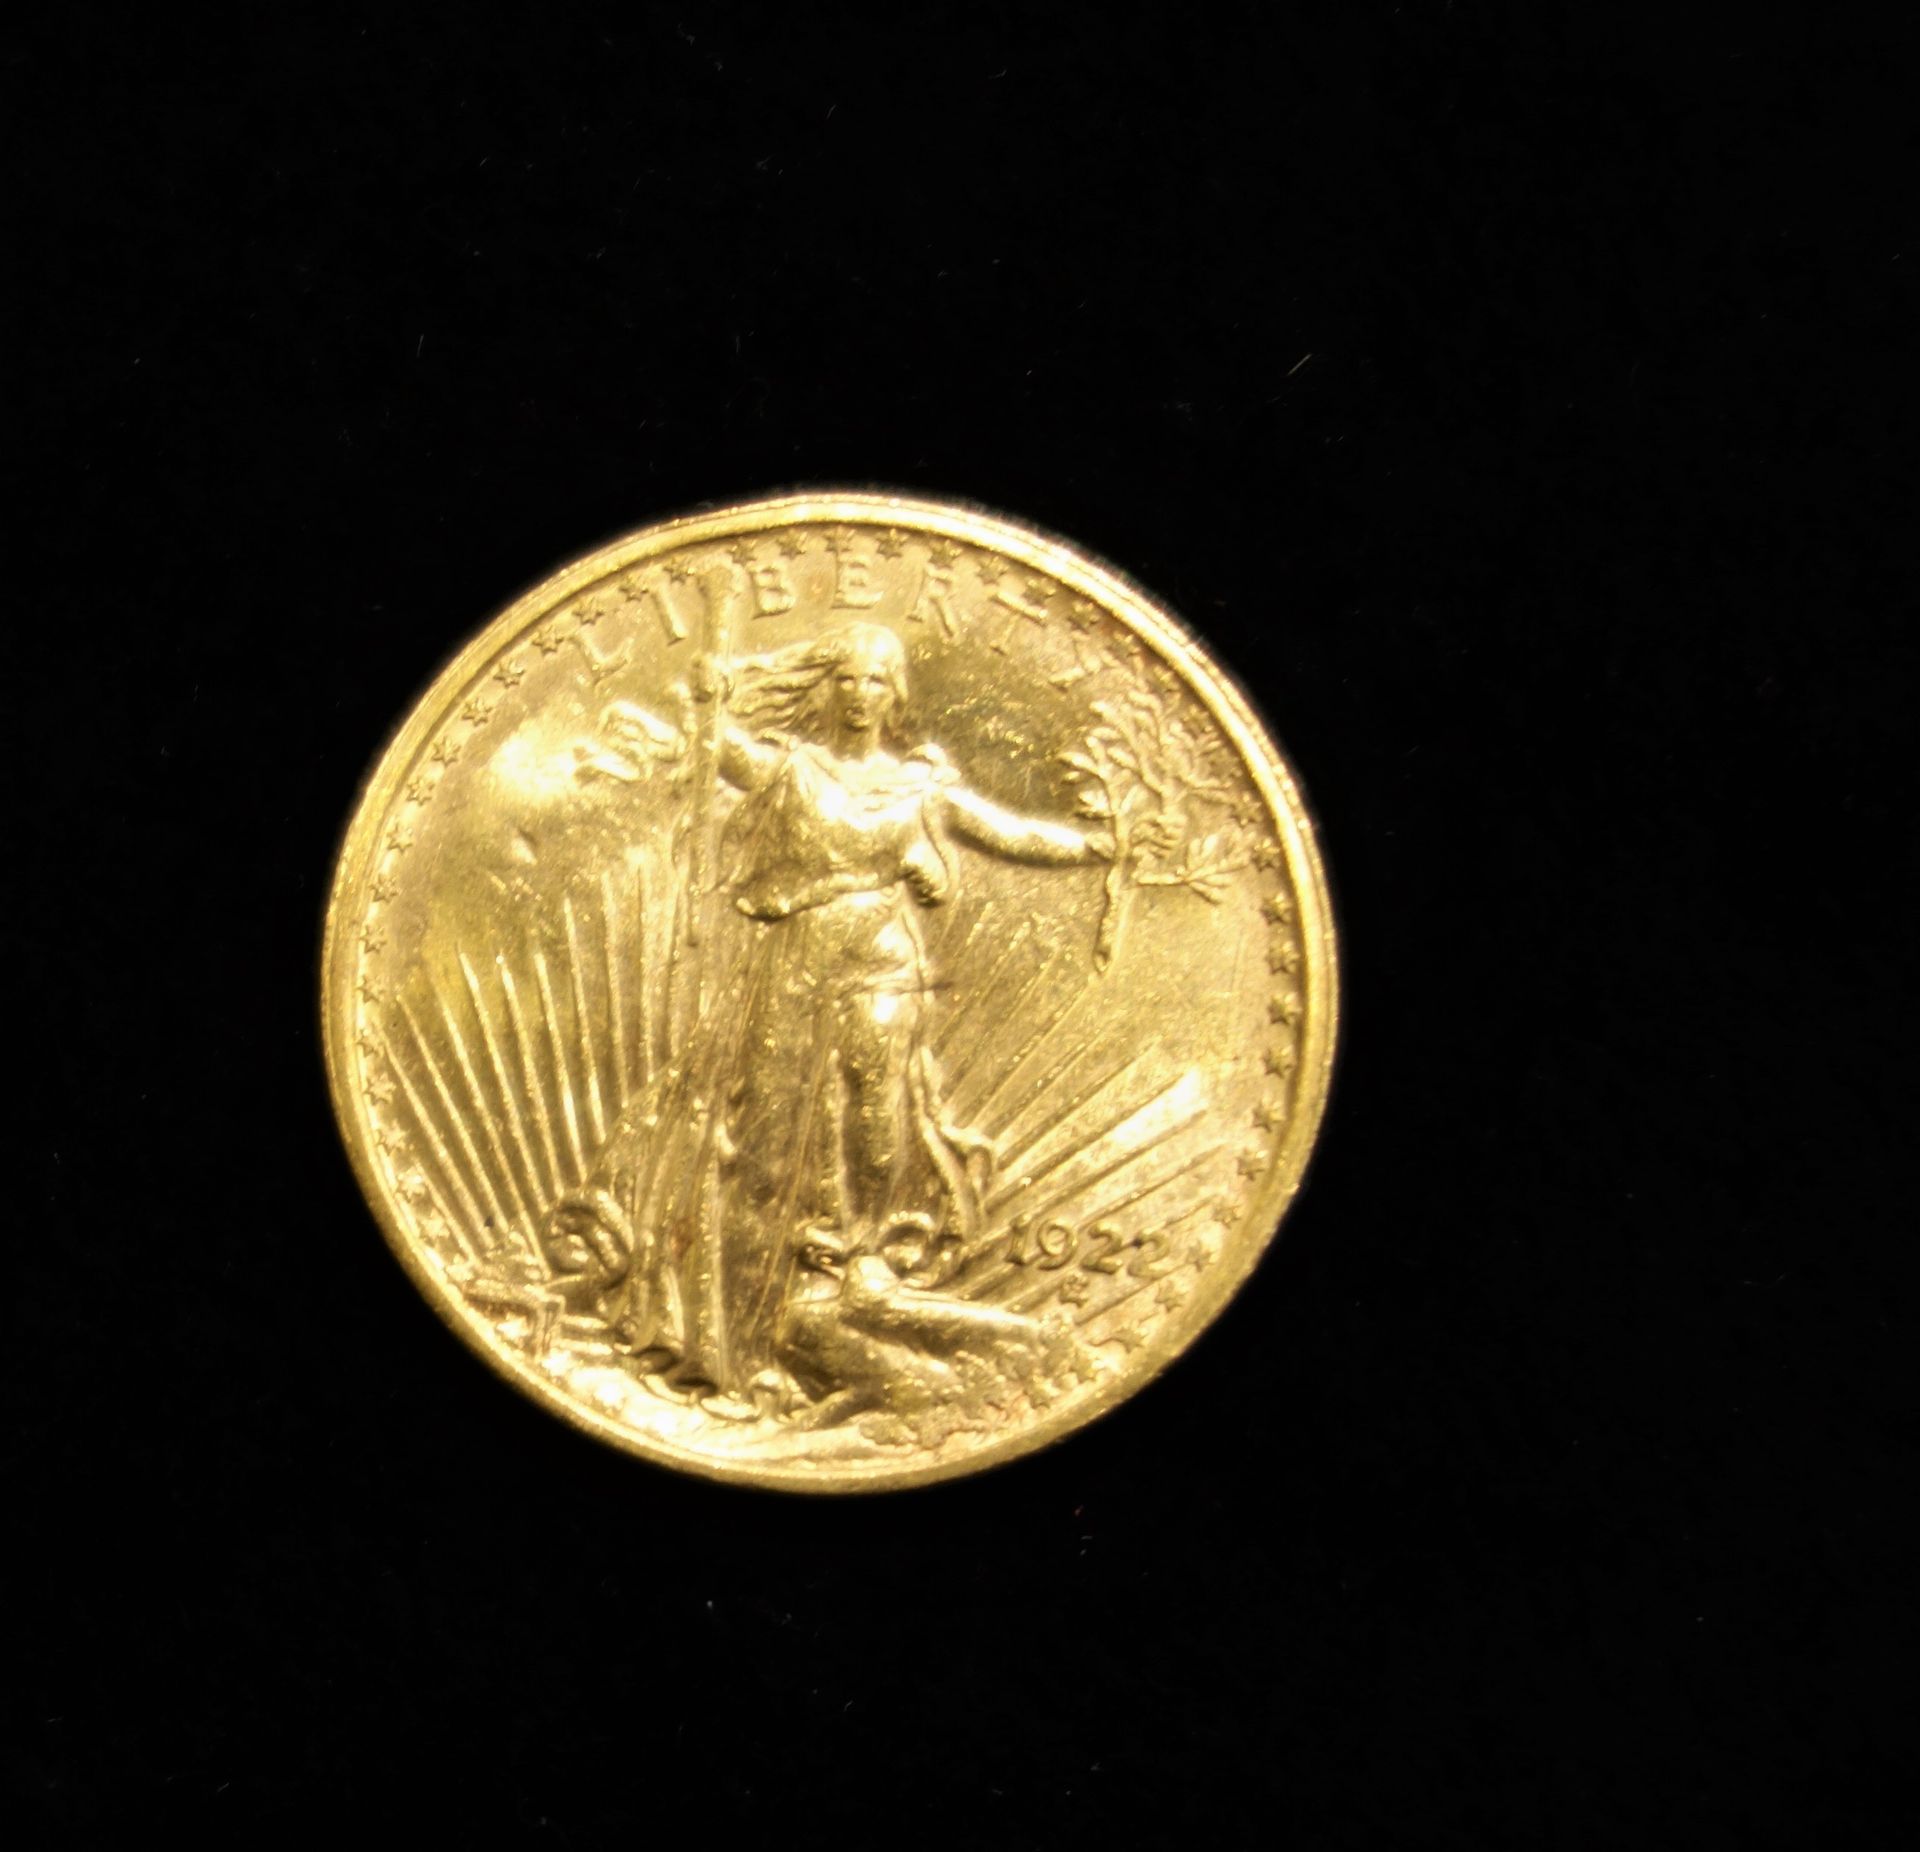 Null 20 US $ Liberty gold coin.
Peso: 33,42 g